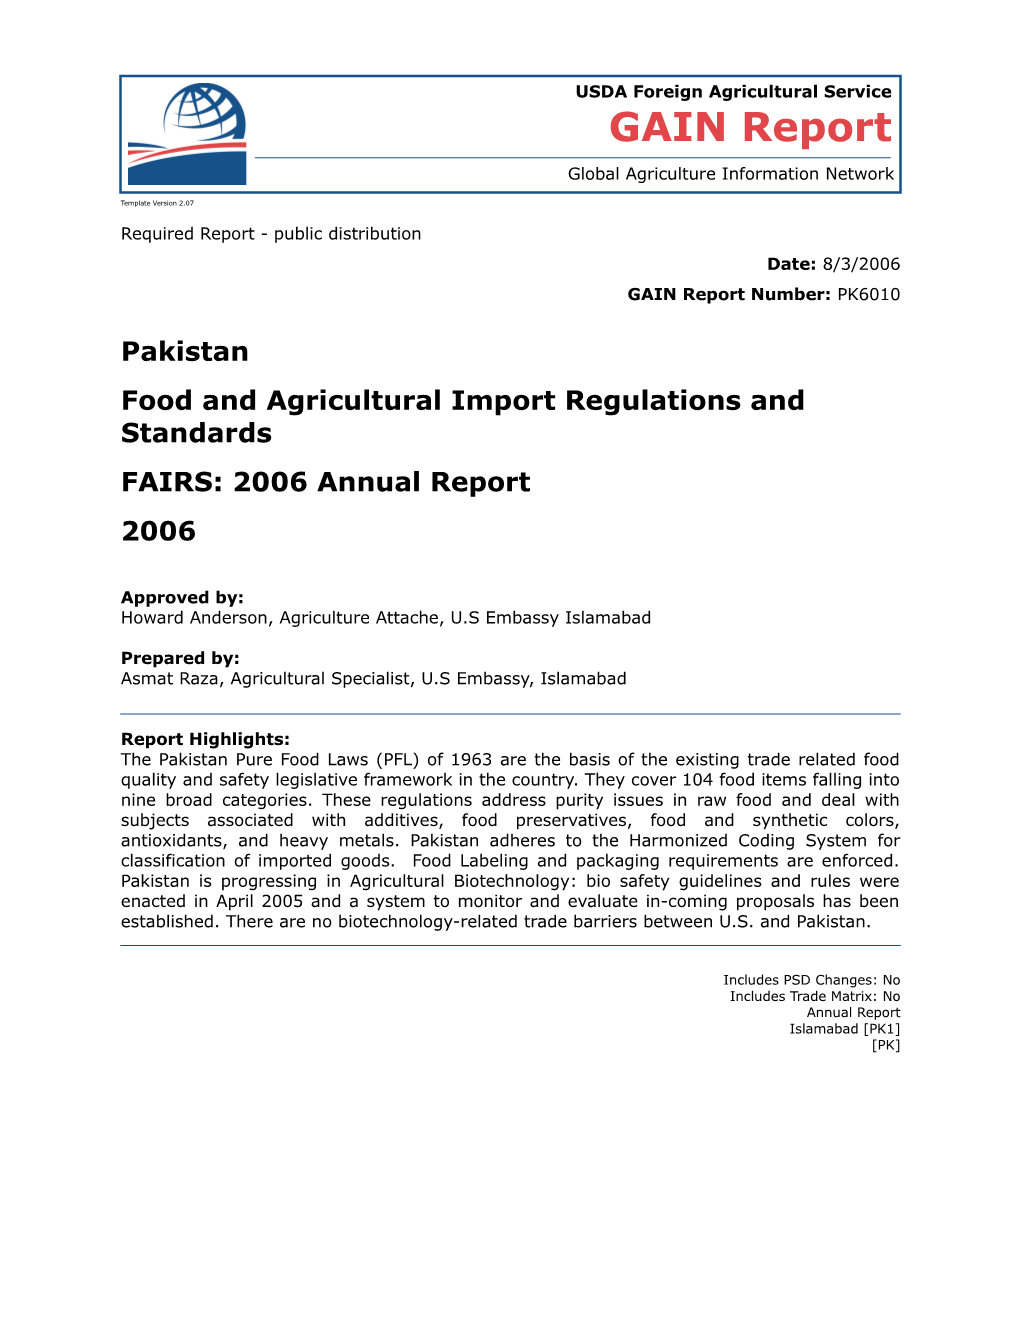 Food and Agricultural Import Regulations and Standards s16